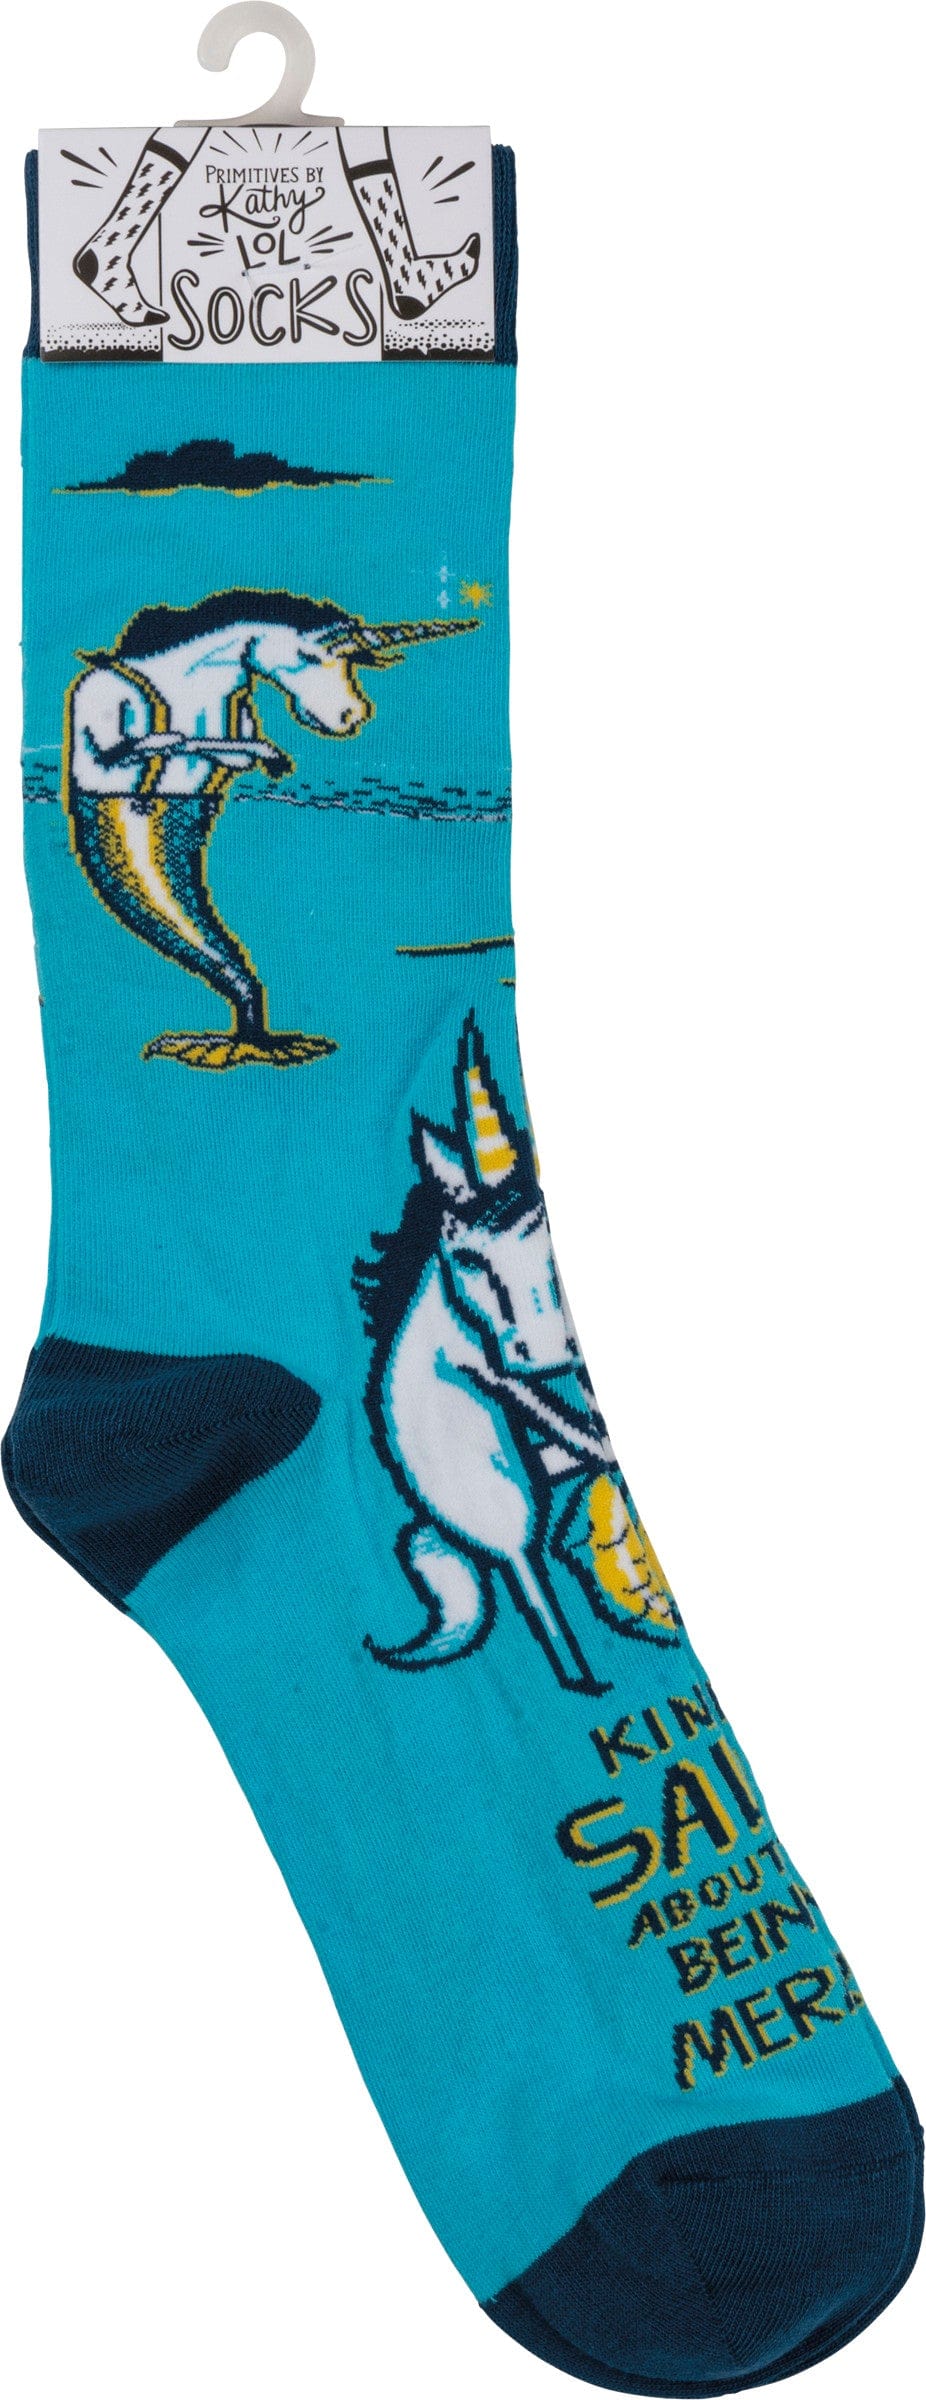 Socks One Size Fits Most Socks - Kinda' Salty About Not Being A Mermaid PBK-102775